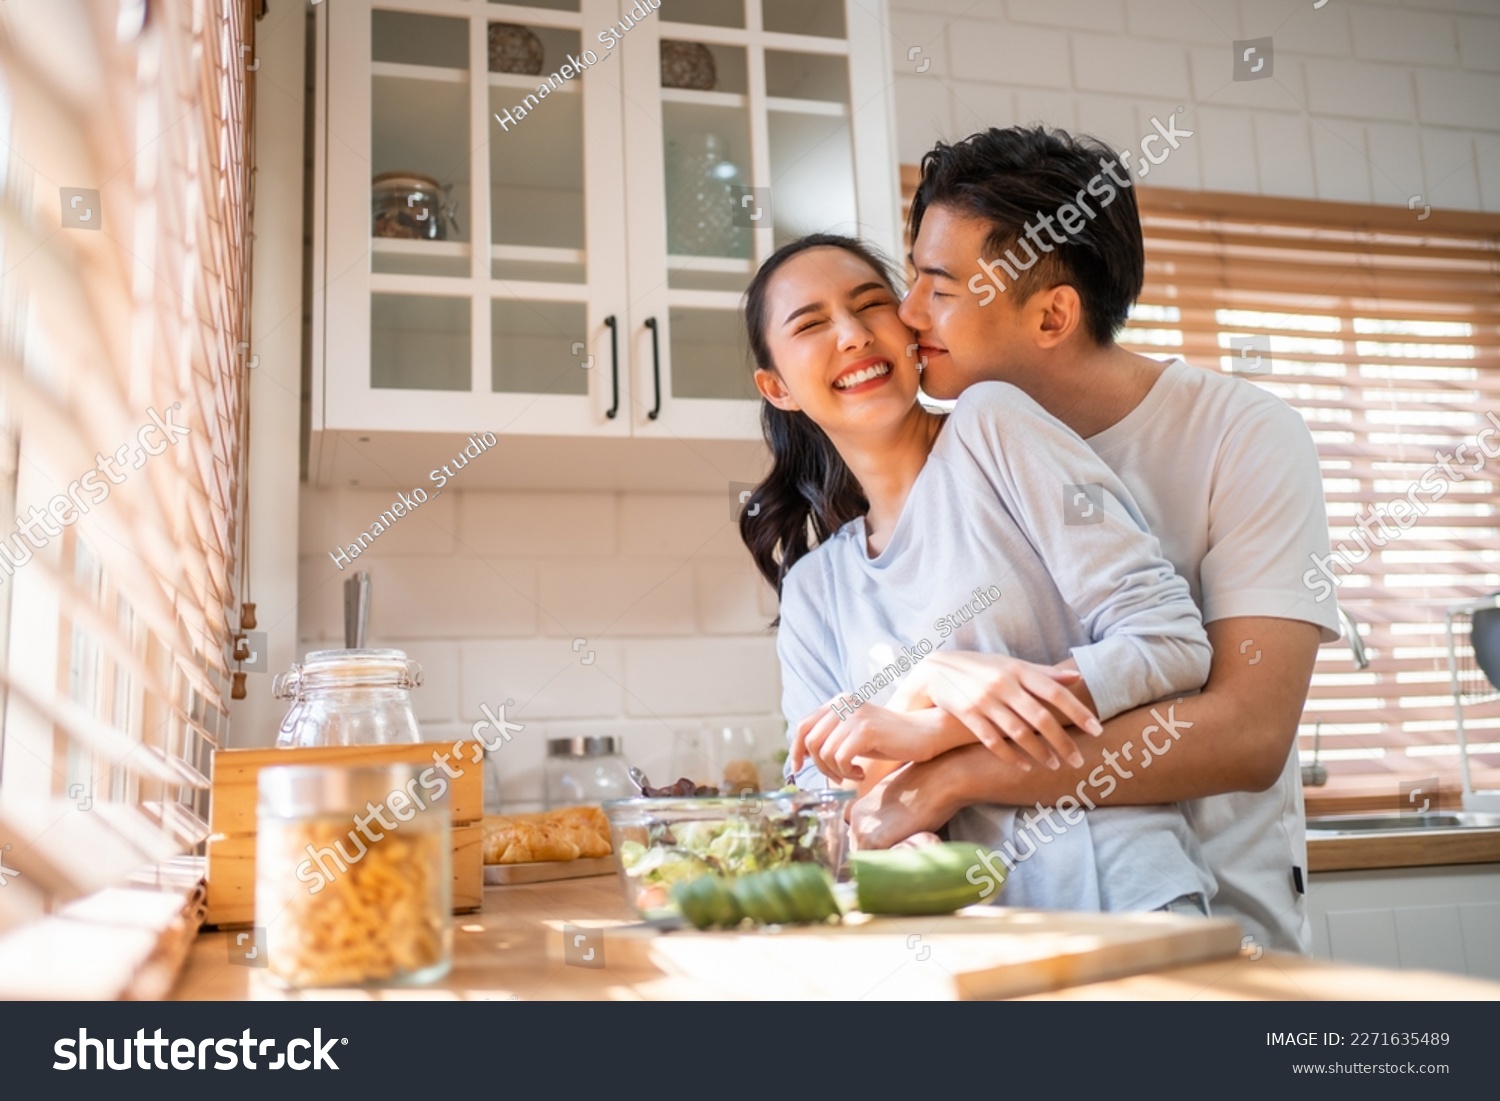 Asian young new marriage couple spend time together in kitchen at home. Attractive man and woman feeling happy and relax, enjoy cooking foods for breakfast with happiness. Family relationship concept. #2271635489